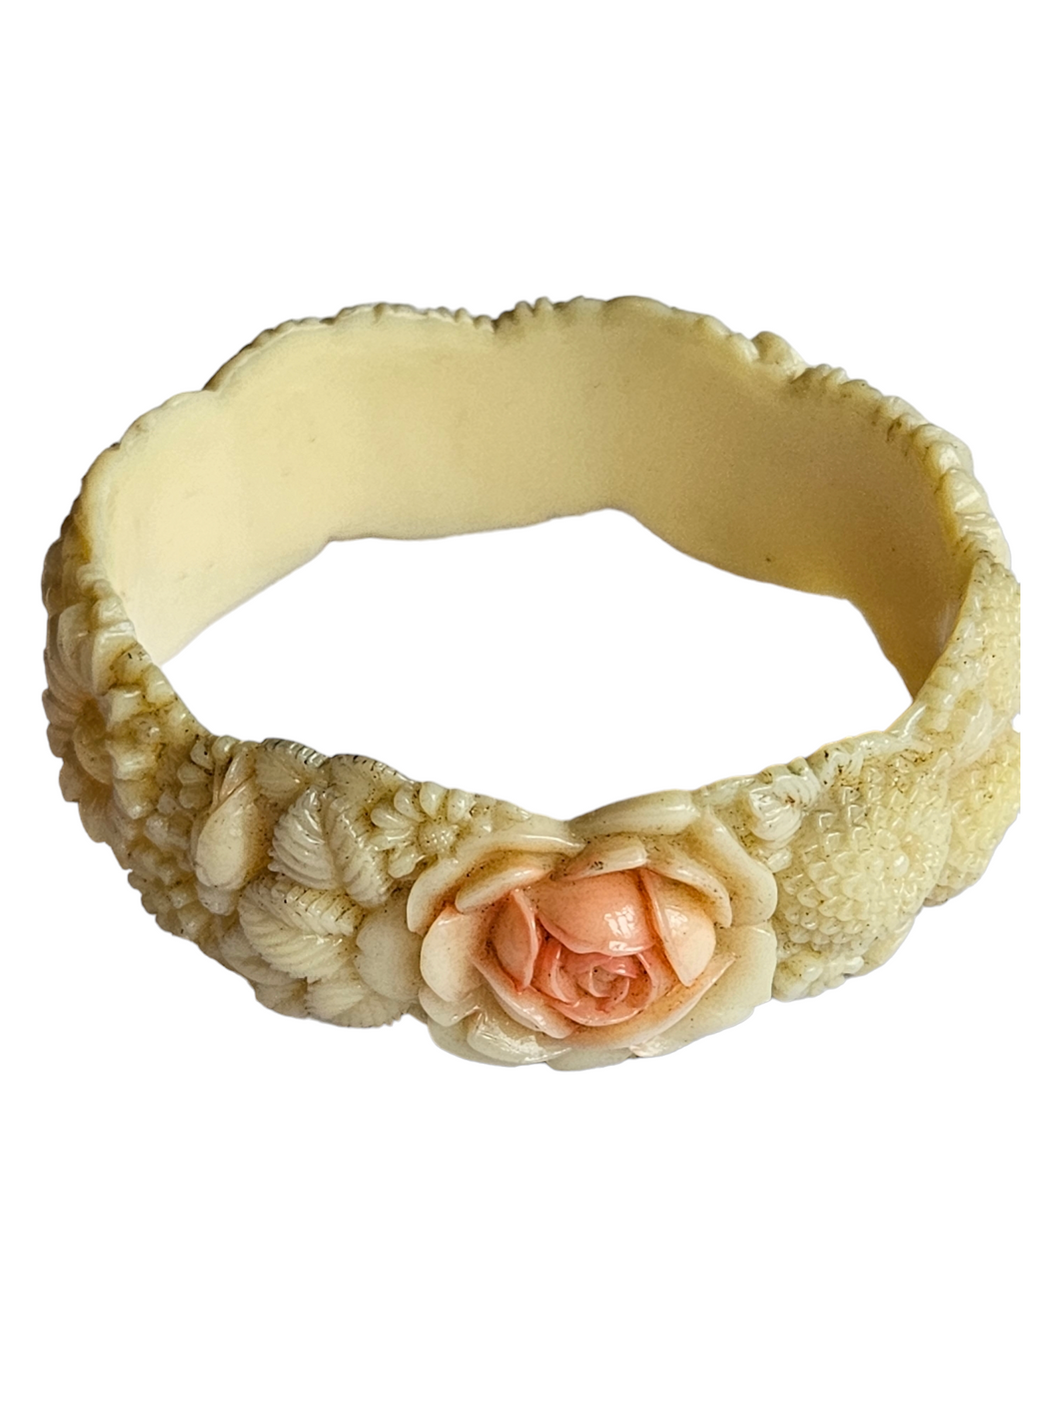 1940s Cream and Pink Flower Celluloid Bangle